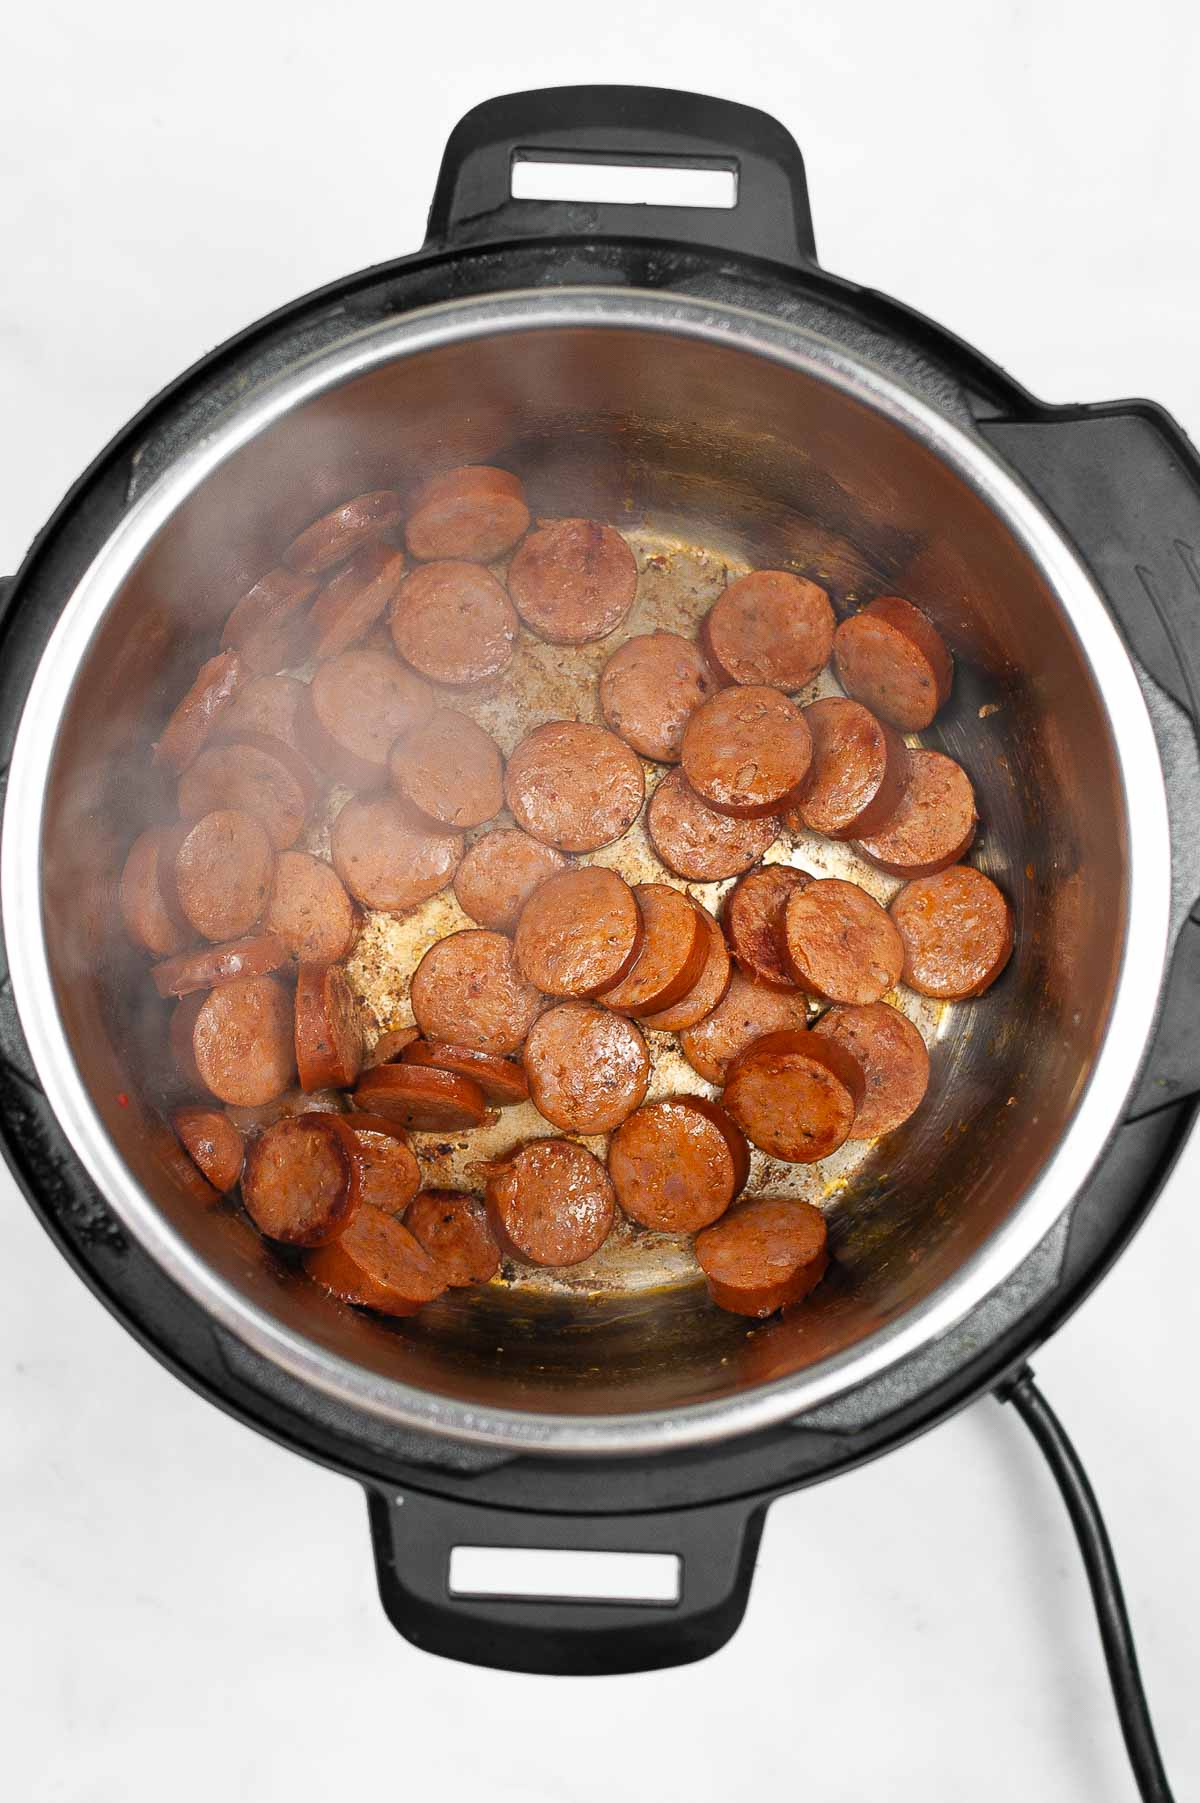 Browning andouille sausage in the Instant Pot.